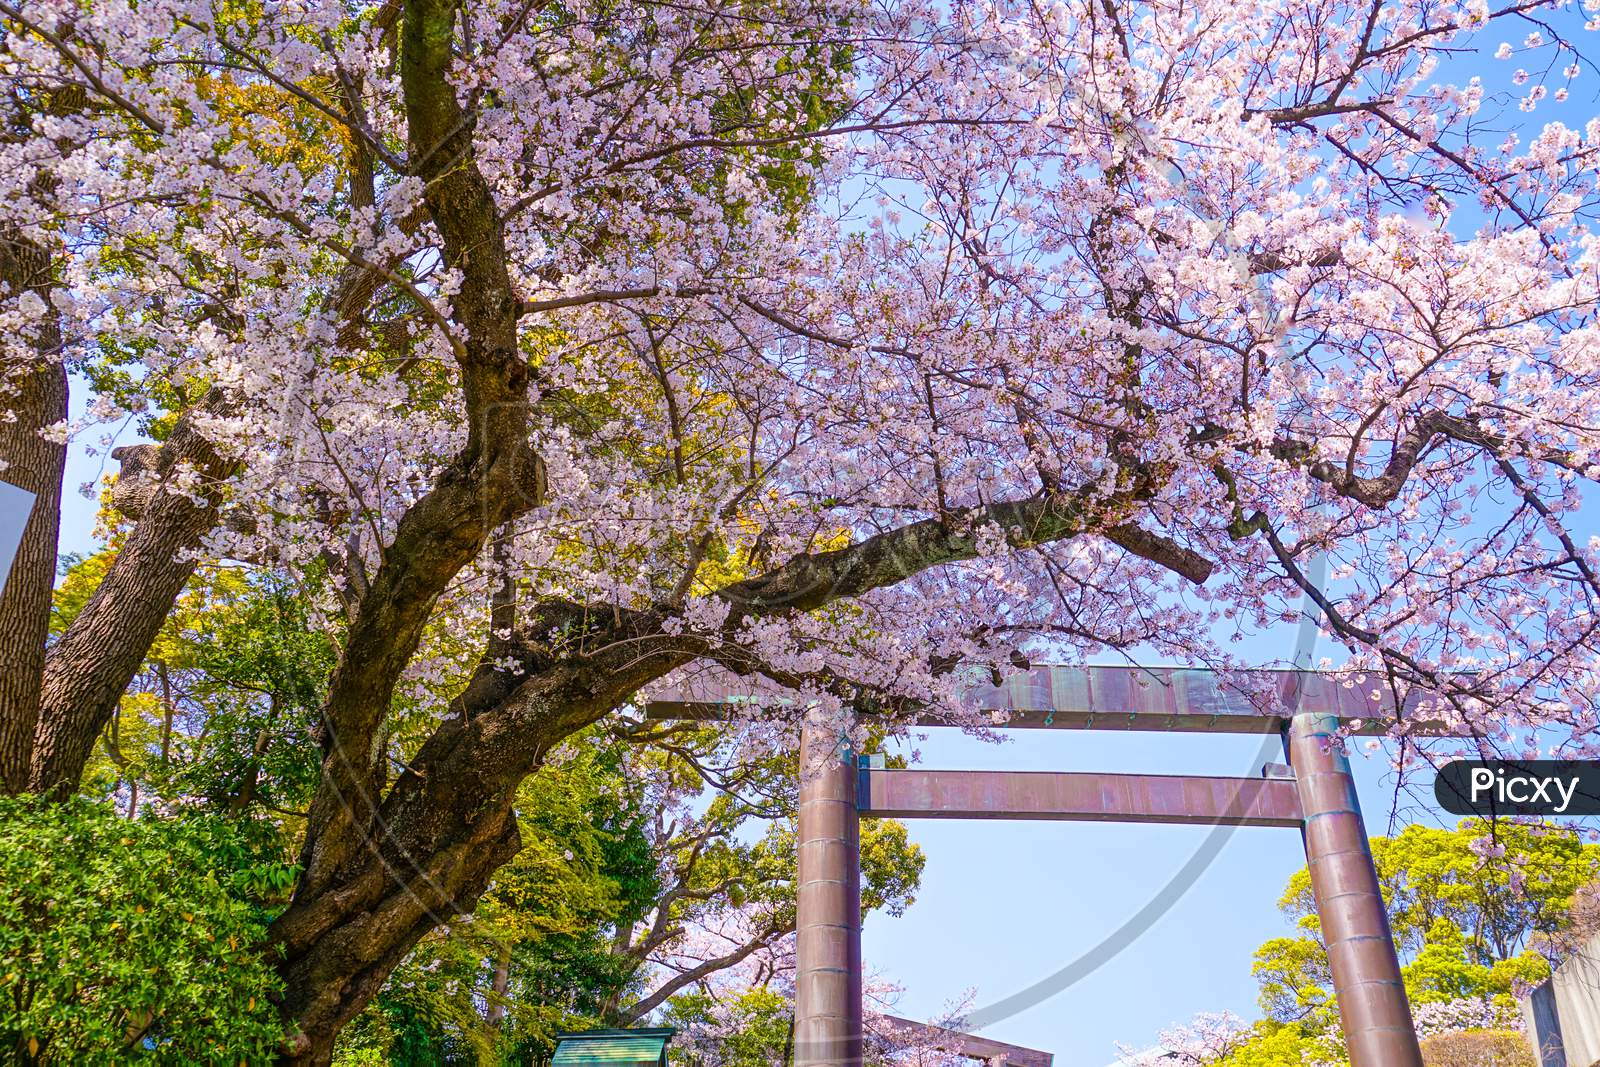 Shrine Ornaments And Cherry Blossoms